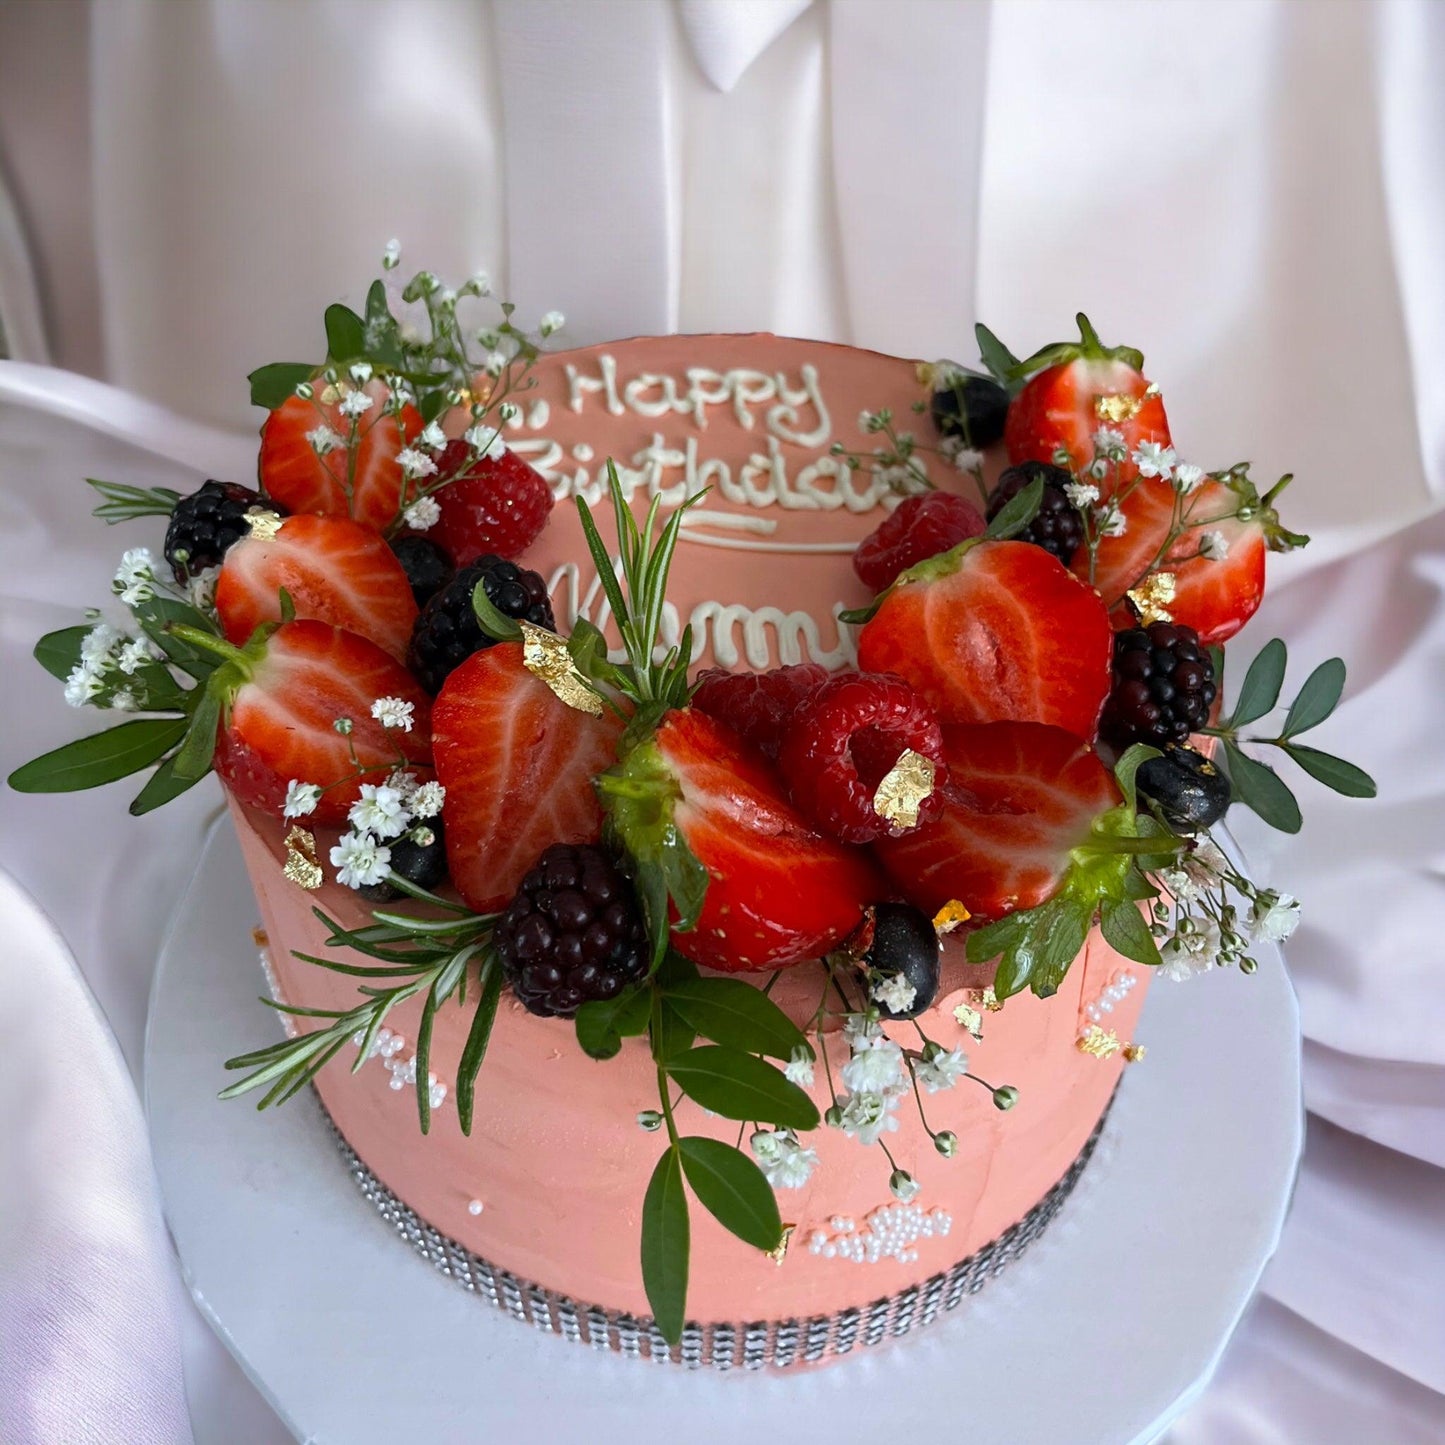 Vanilla cake with fruits - Naturally_deliciousss